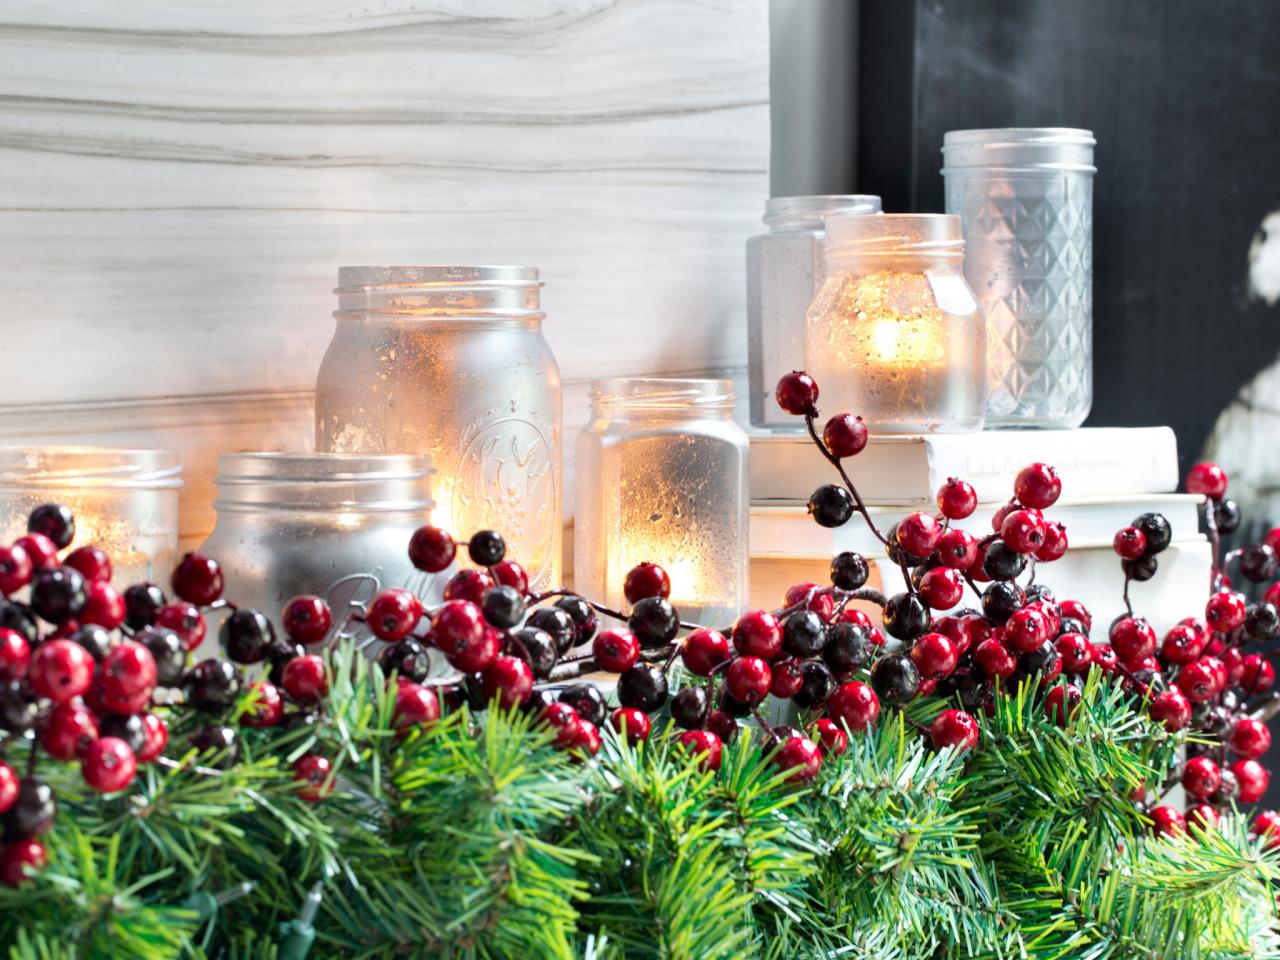 Closeup of holiday decor with evergreens, berries and candles